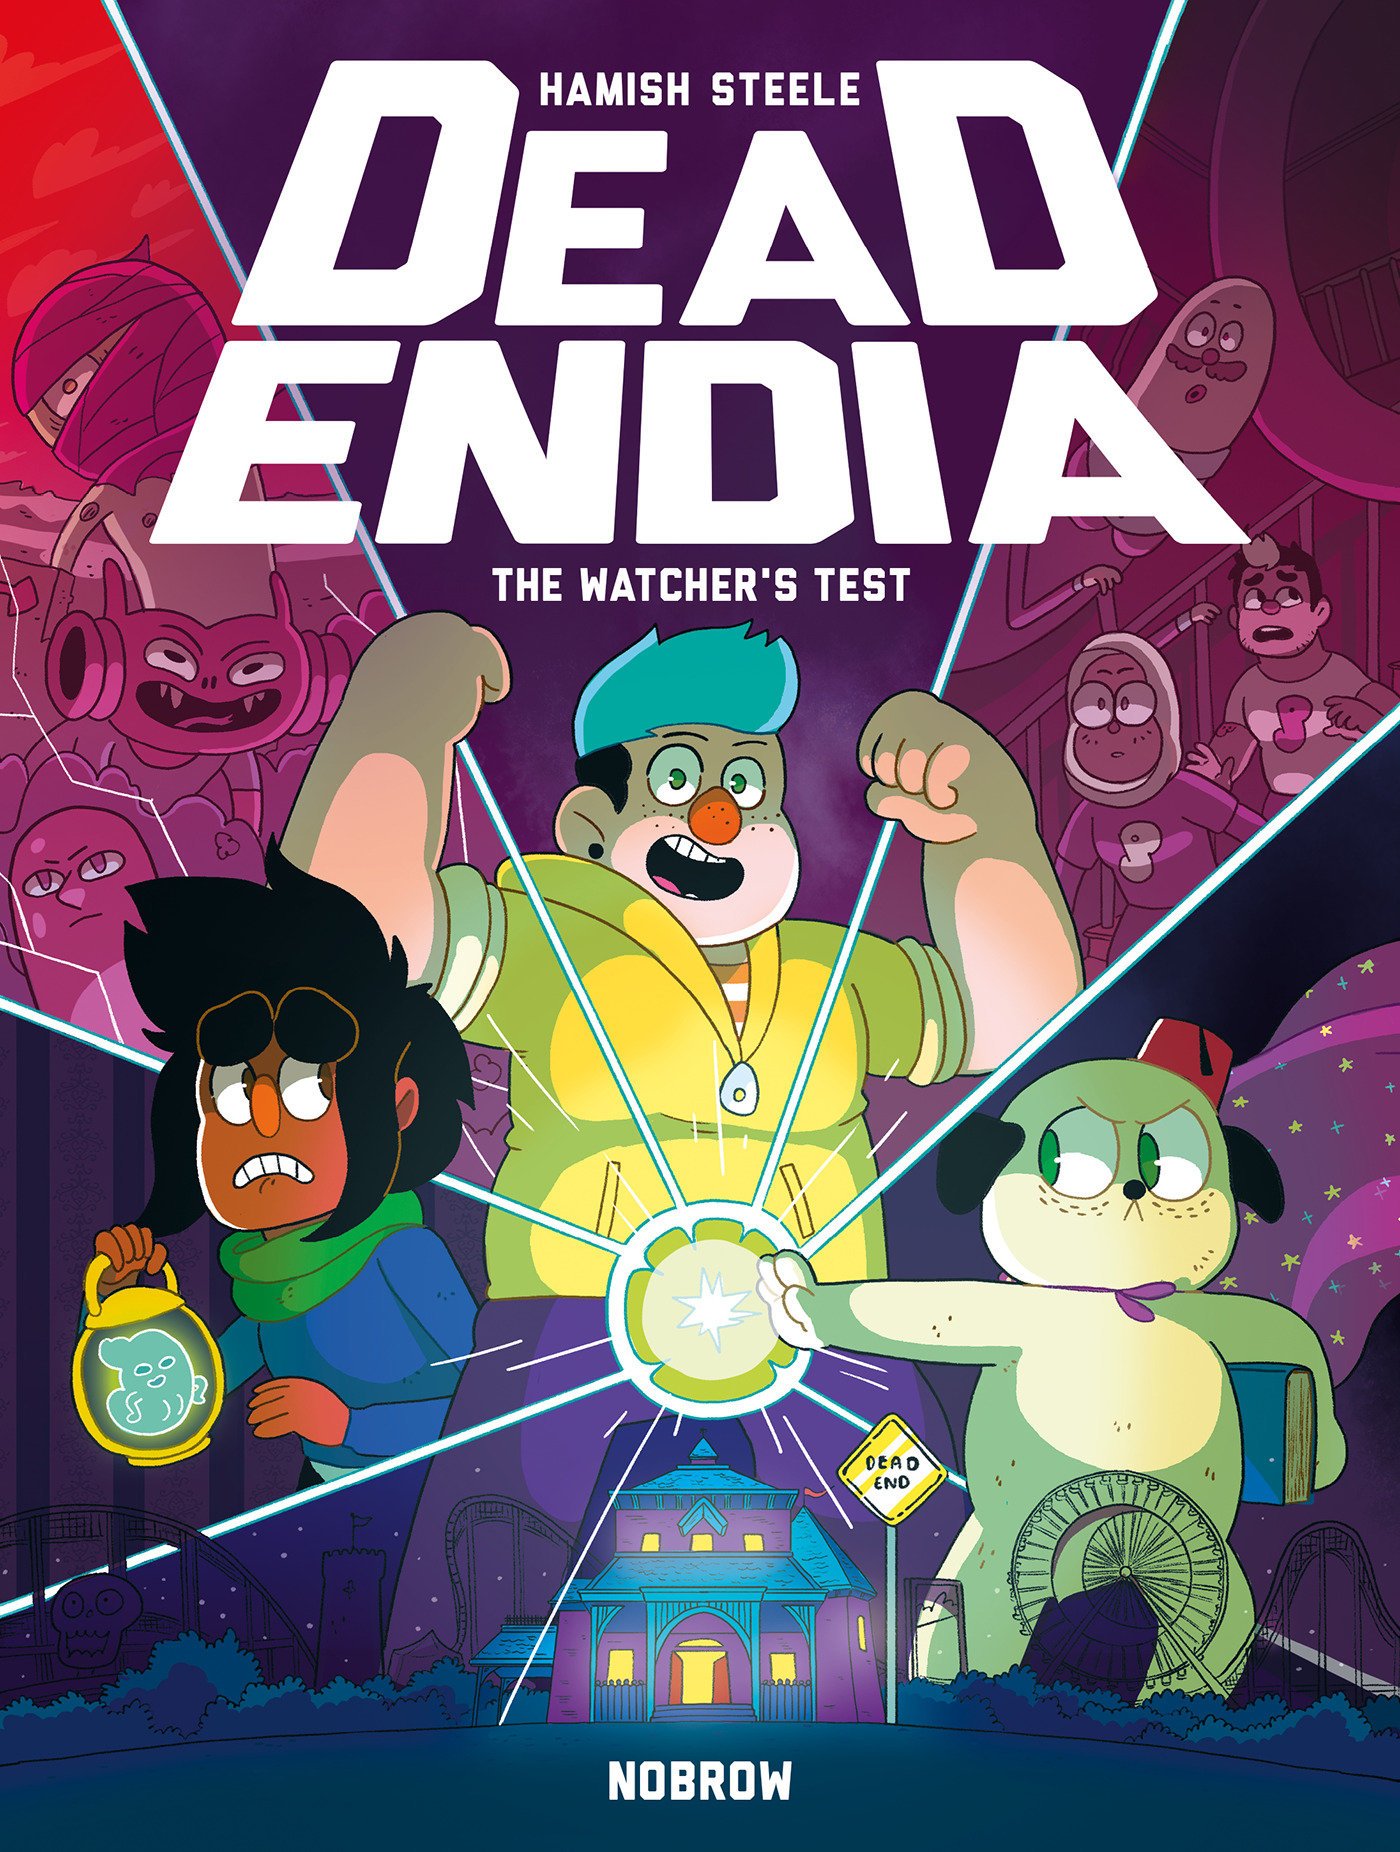 Taking an idea from graphic novel to Netflix series with the creator of  DeadEndia